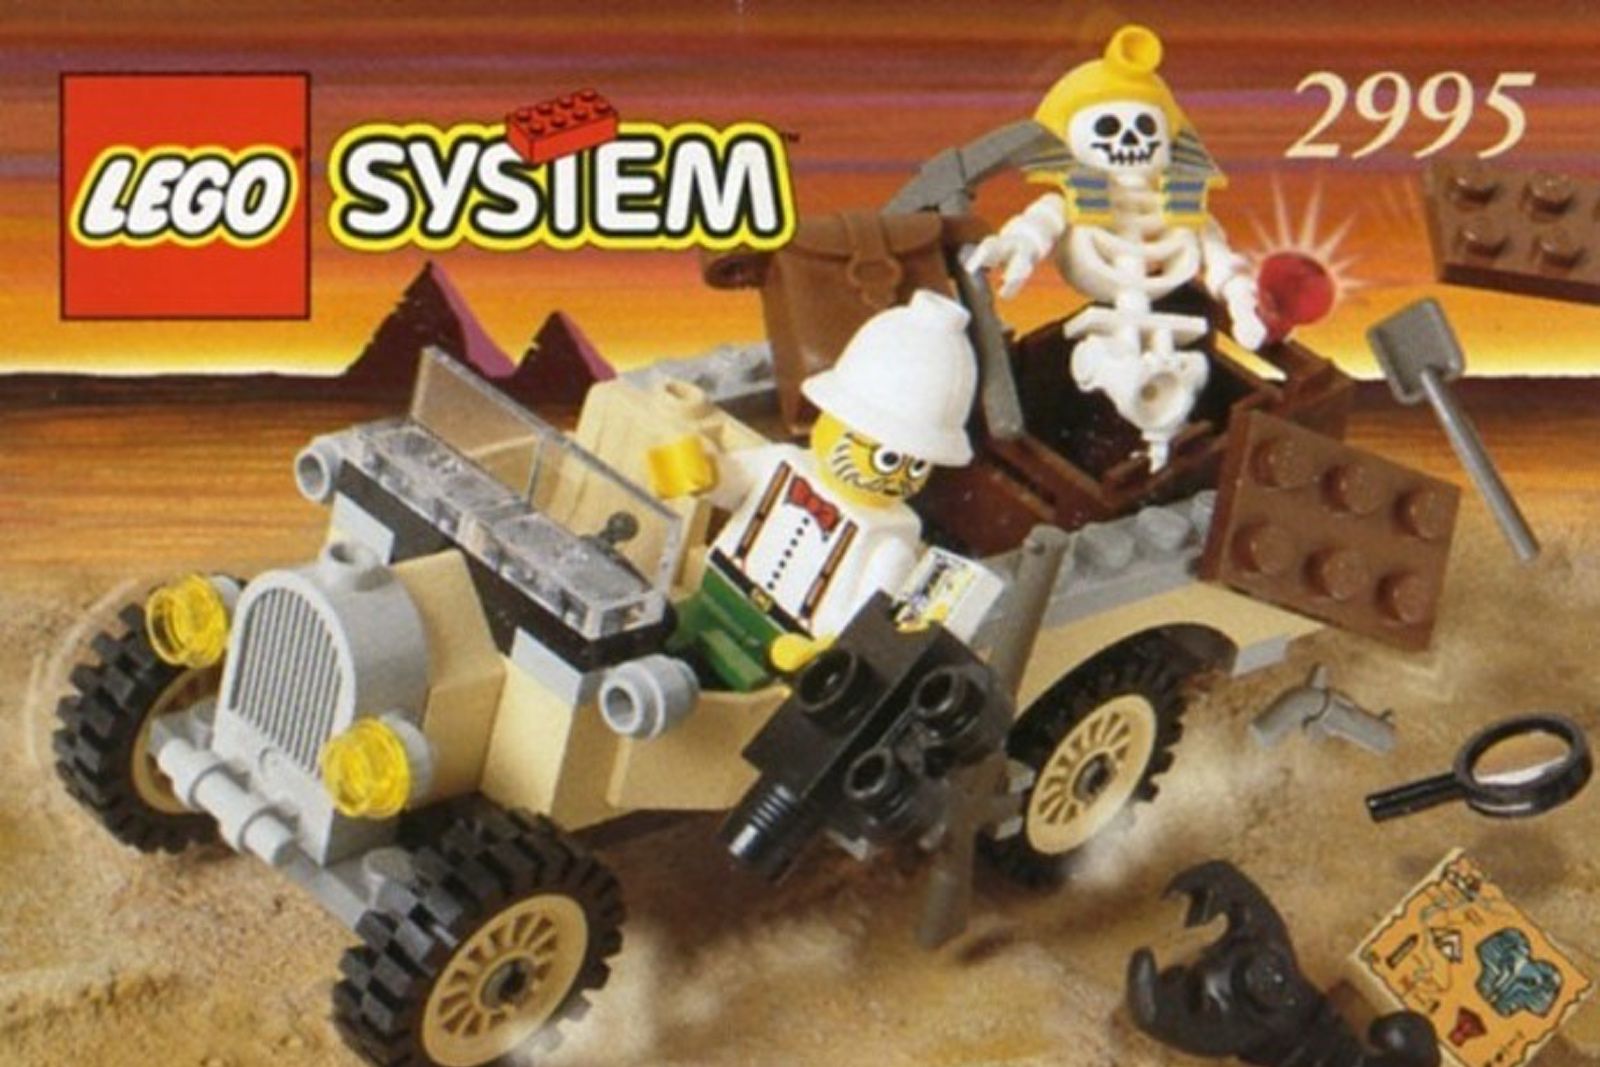 Remember These The Best Lego Sets Of All Time image 177